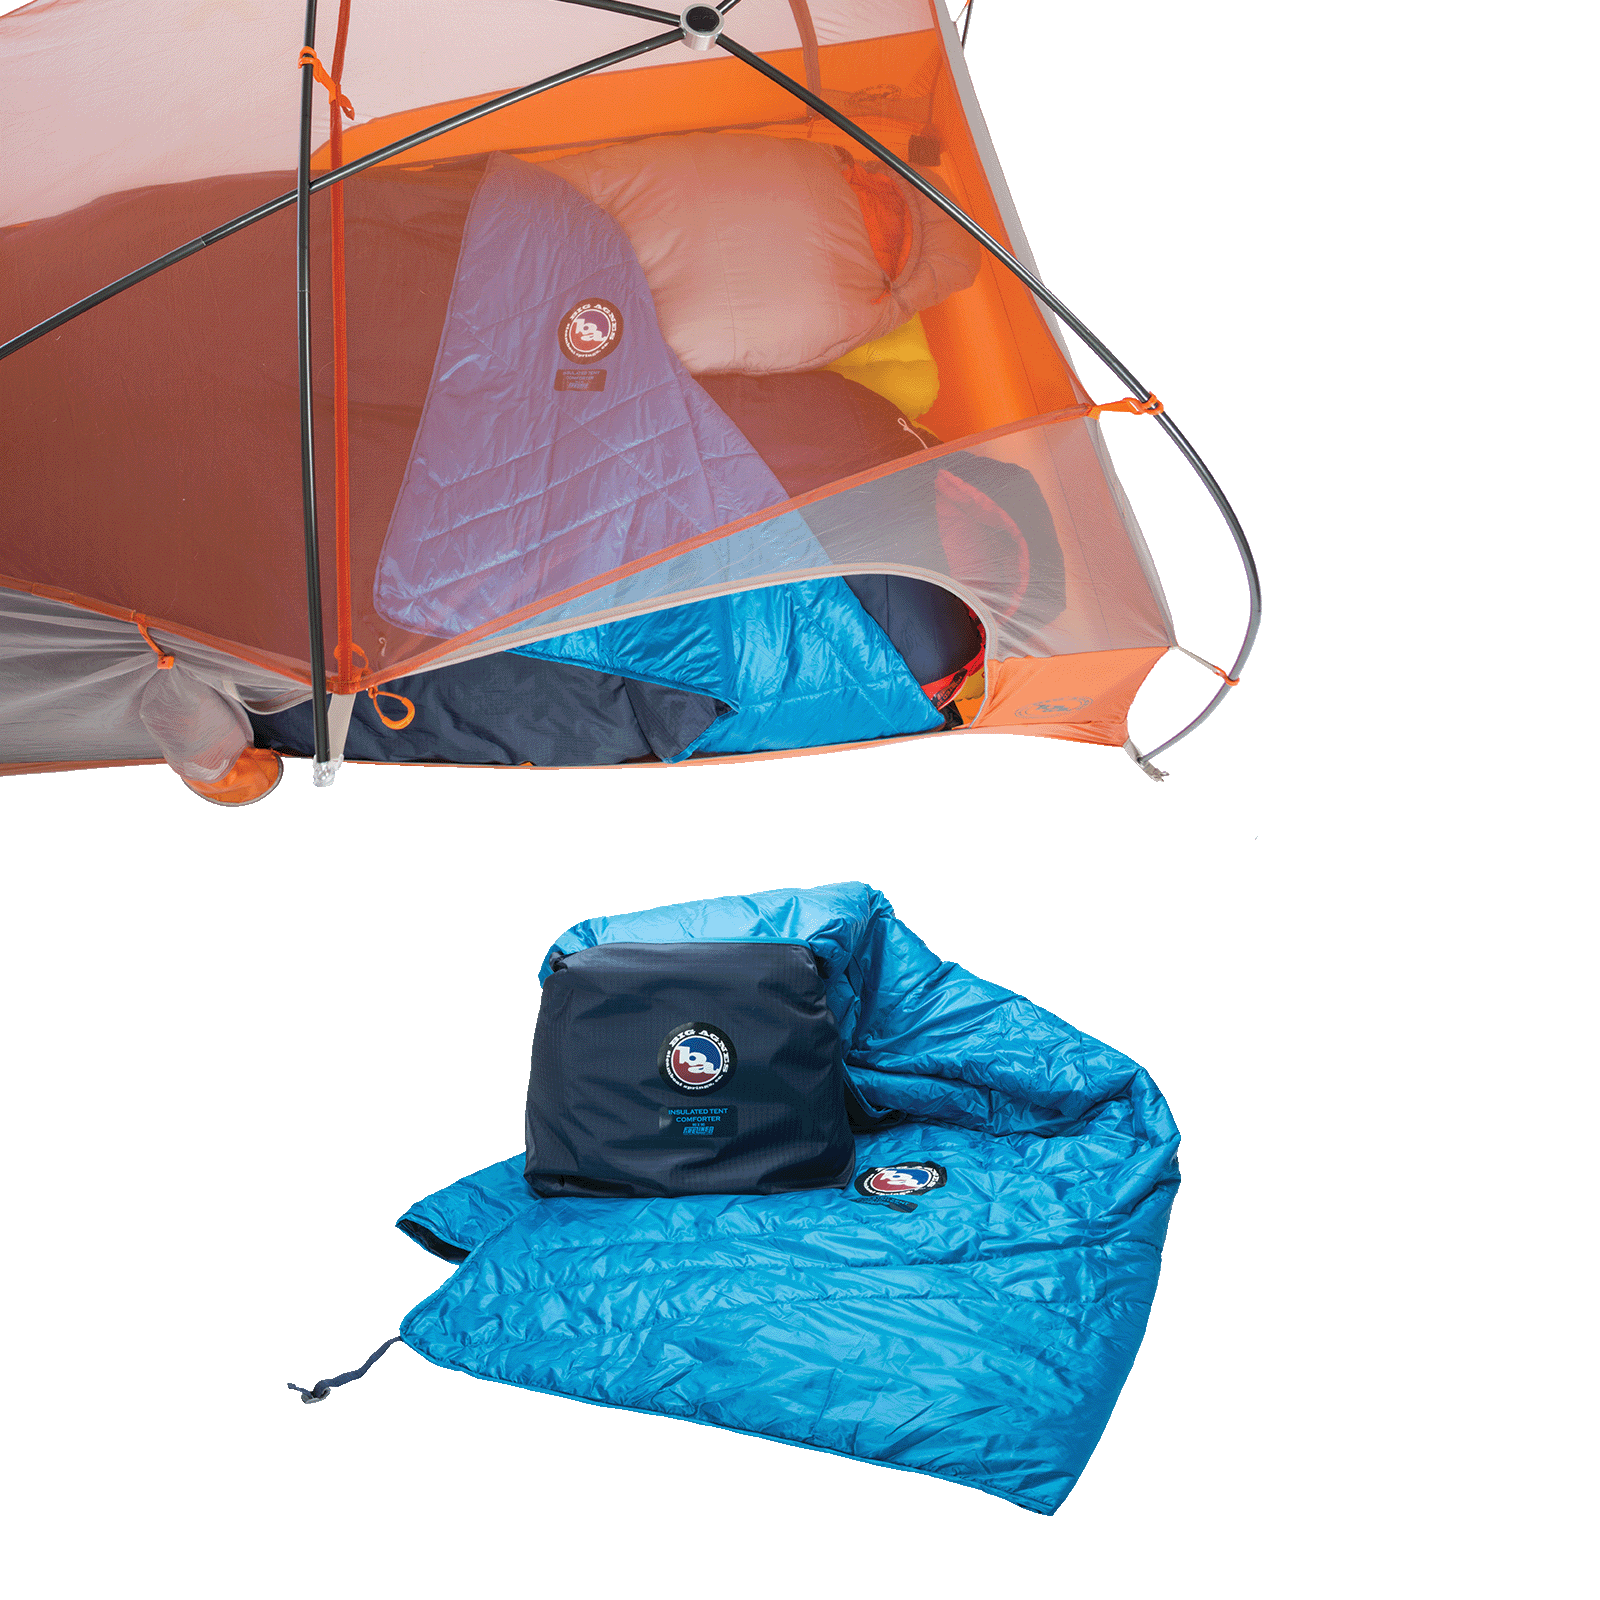 Inflatable Hot Tents: Innovation or Gimmick? - Beyond The Tent